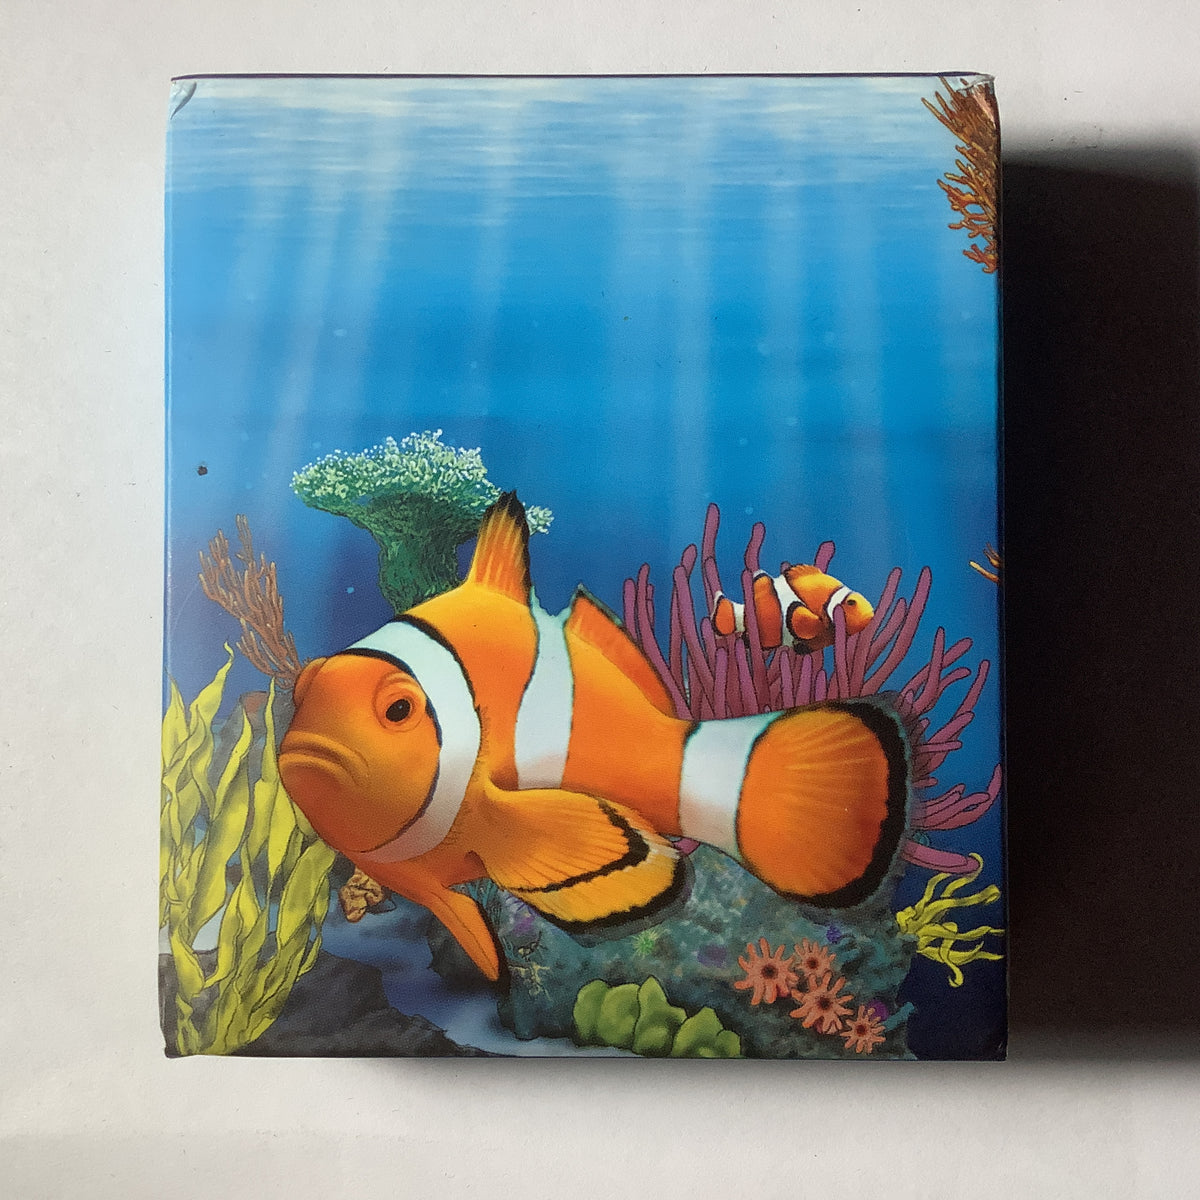 2010 Australian Sea Life The Reef Clown Fish 1/2 ounce silver proof coin.